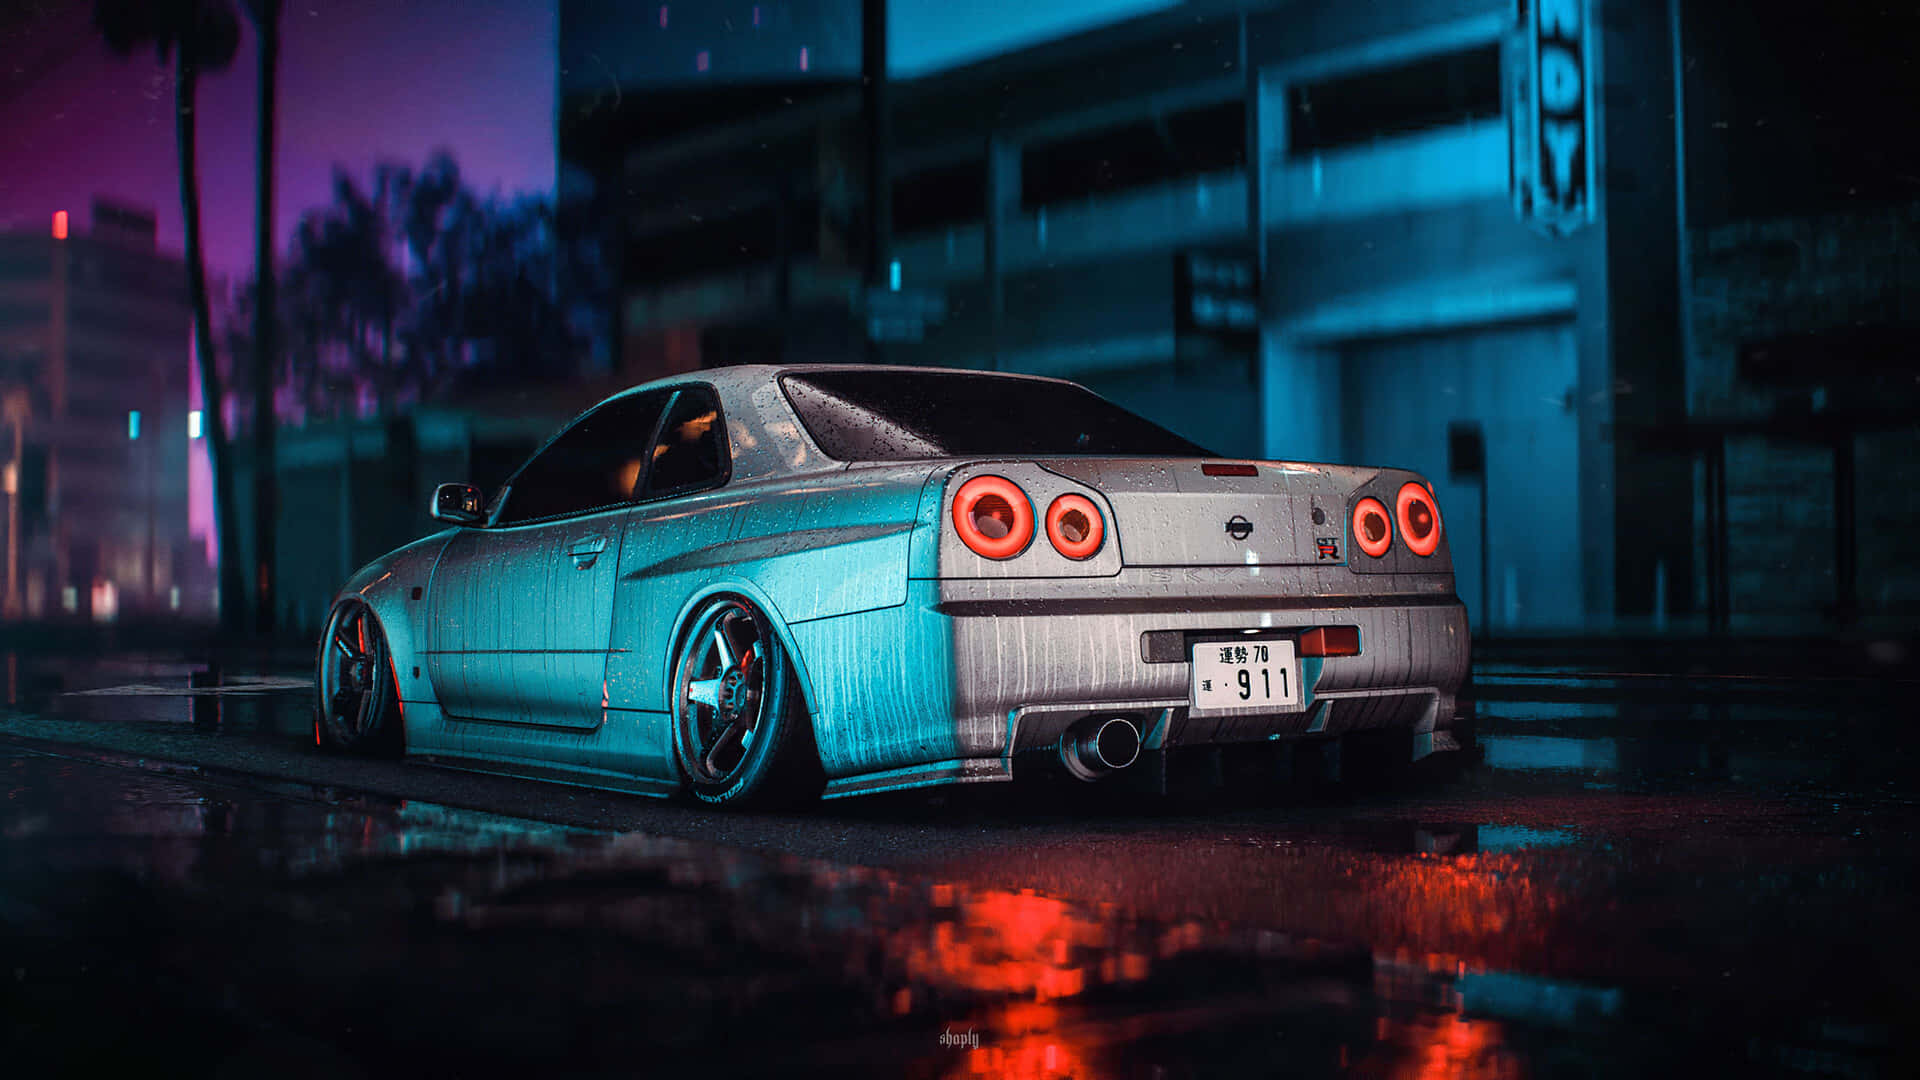 "Be Cool in the Nissan Skyline" Wallpaper